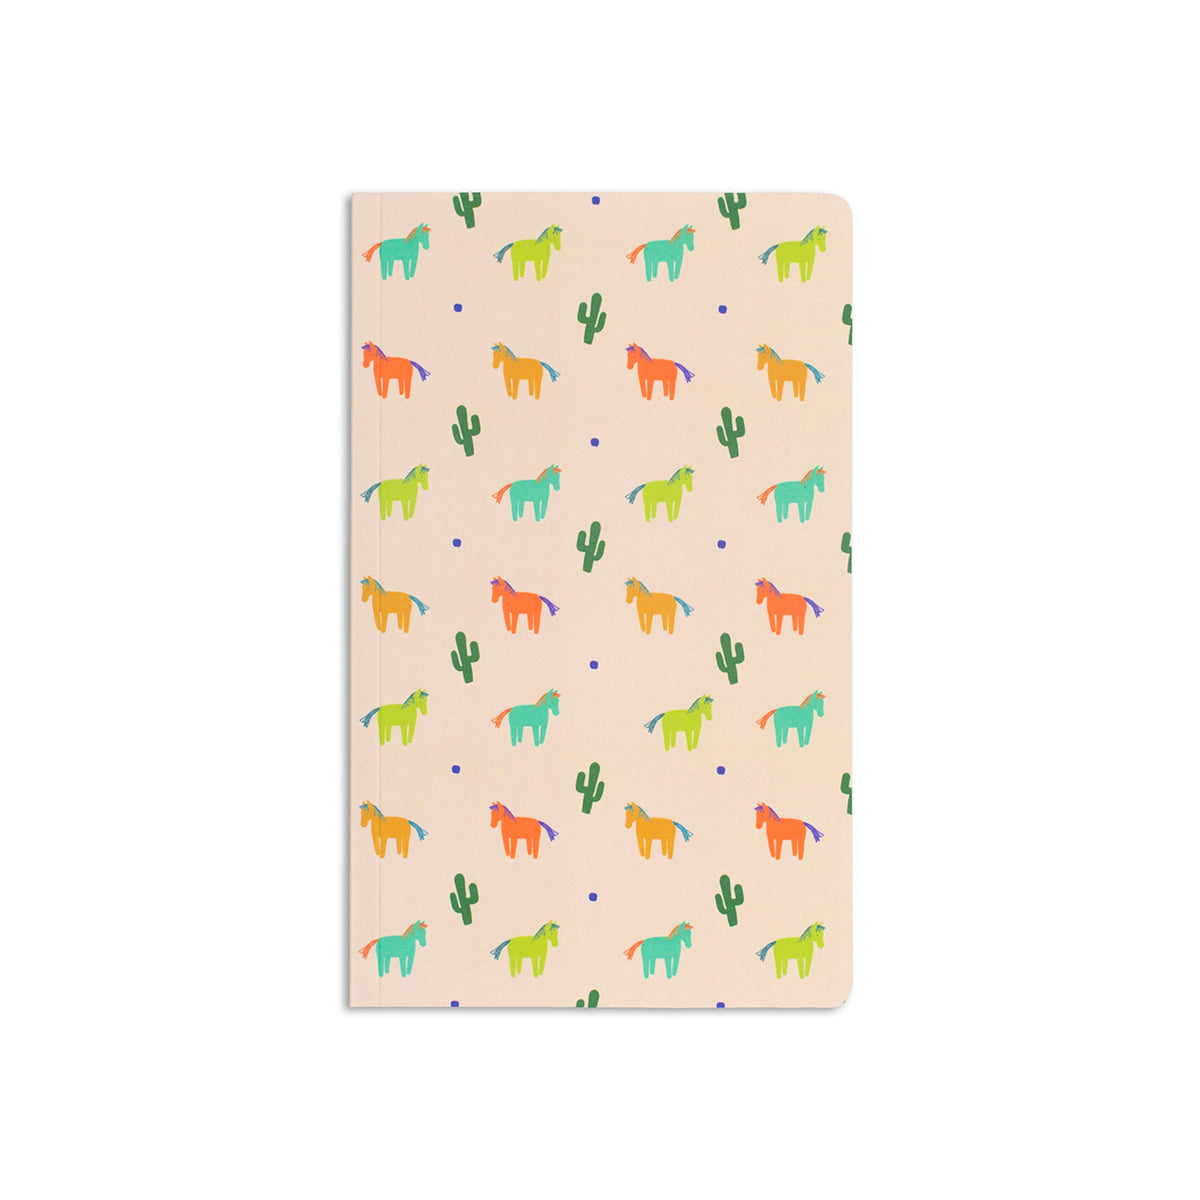 5" x 8.25" soft cover notebook with cactus and horse illustration pattern in shades of green, yellow, blue, orange 